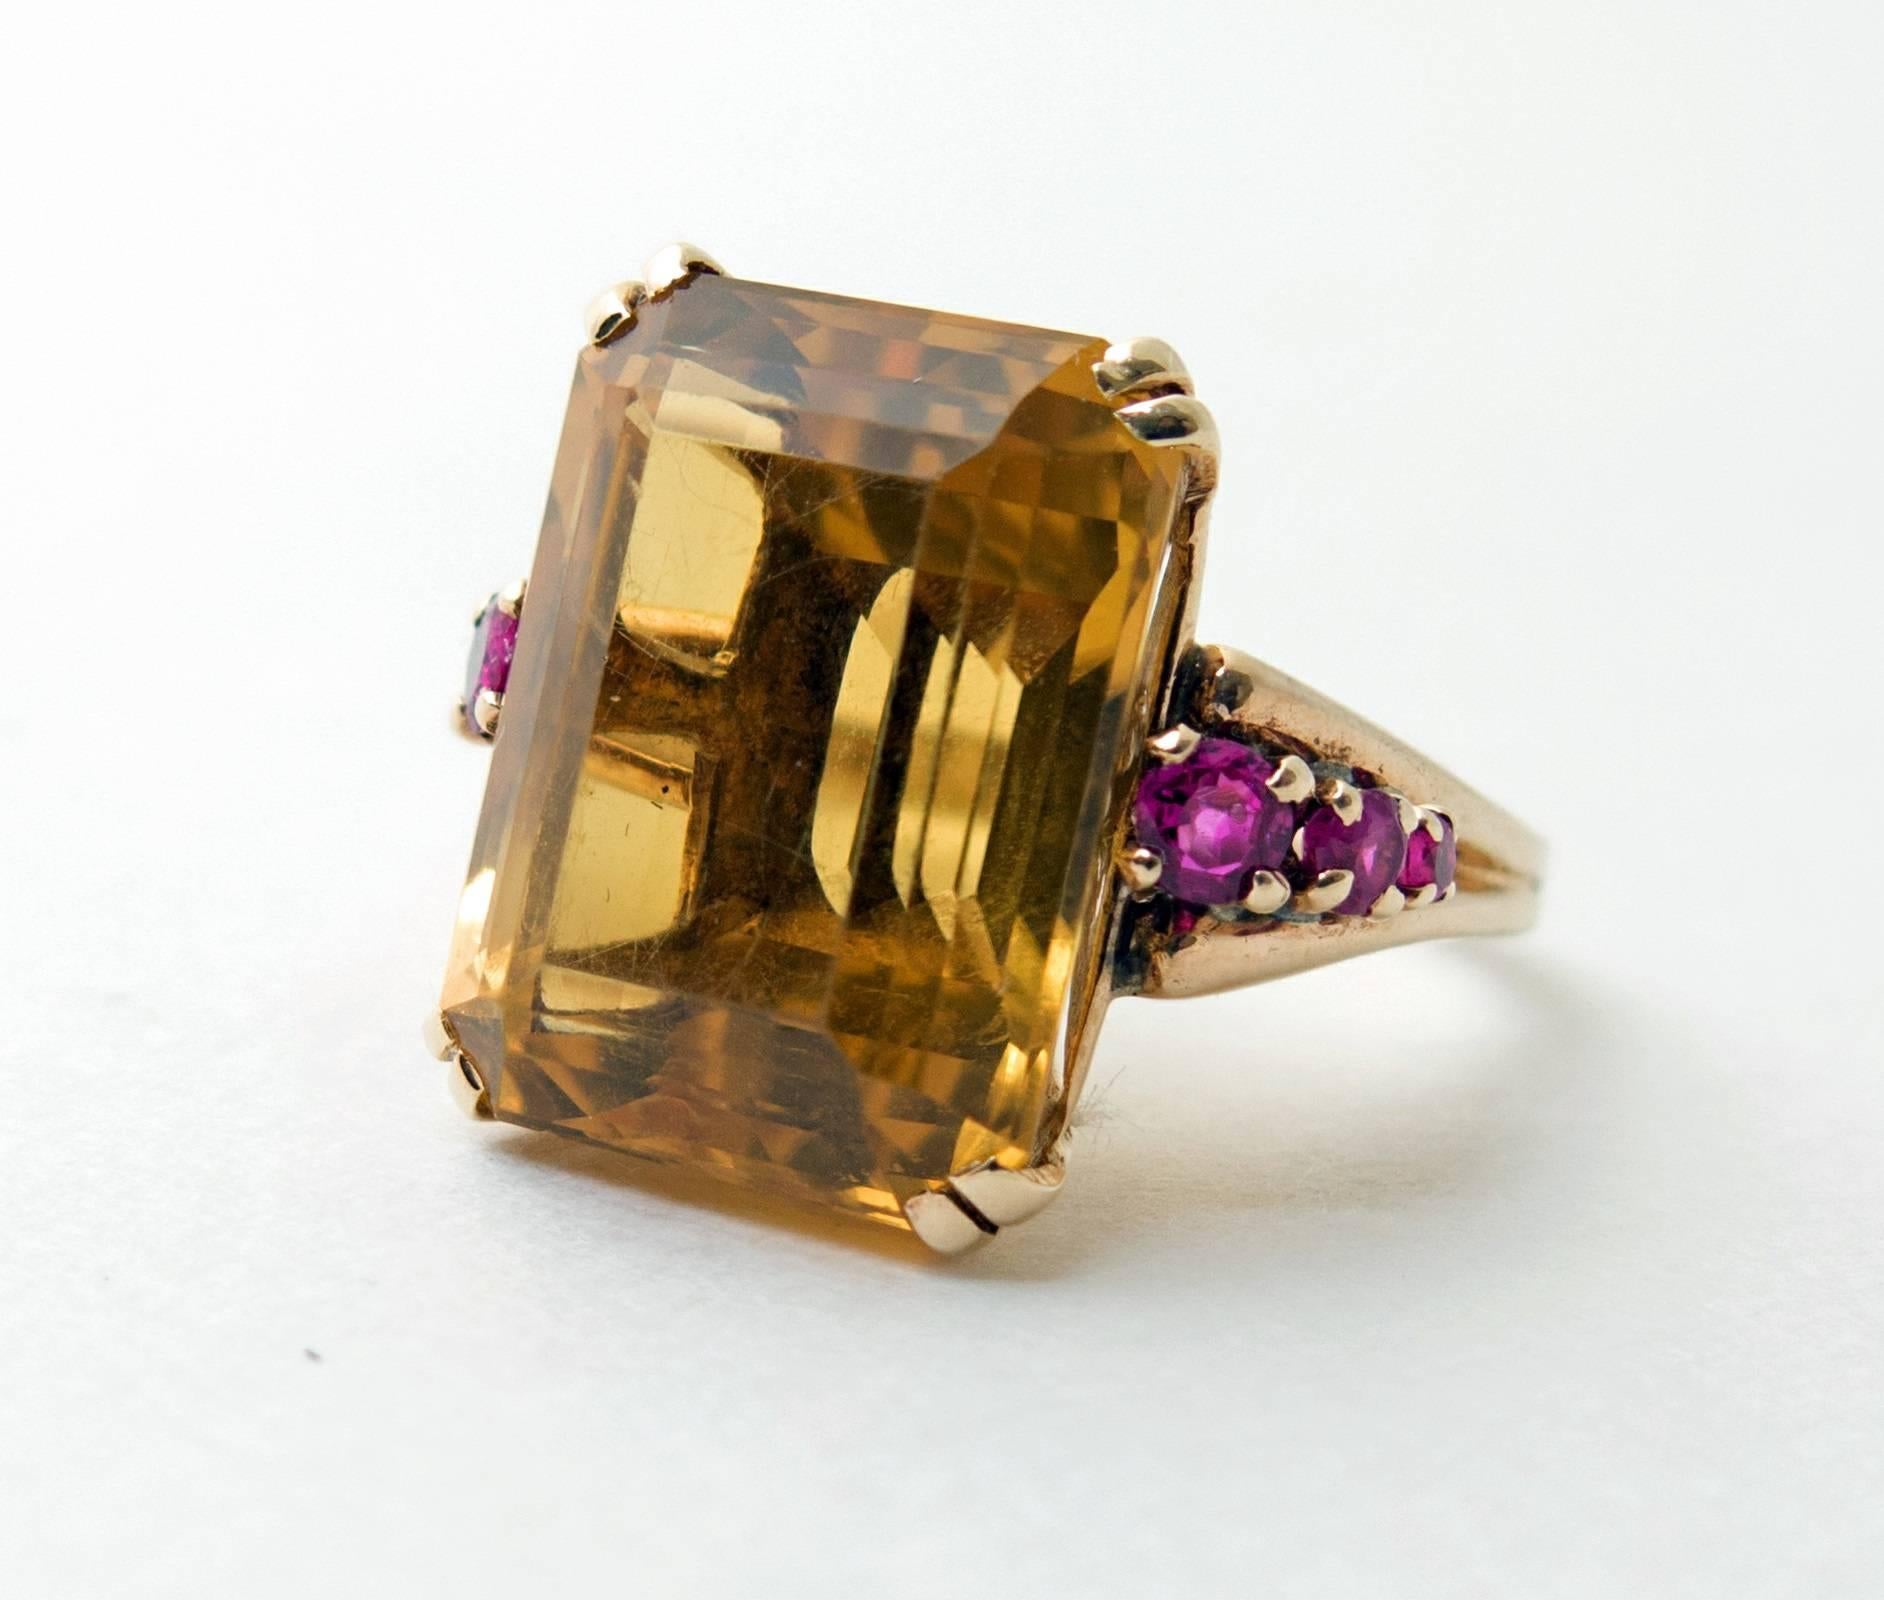 A classic and stunning Retro, 1950's ring, featuring a large 18.18ct. emerald cut citrine of good yellowish orange color. Set in 14k yellow gold with six rubies as accents. 